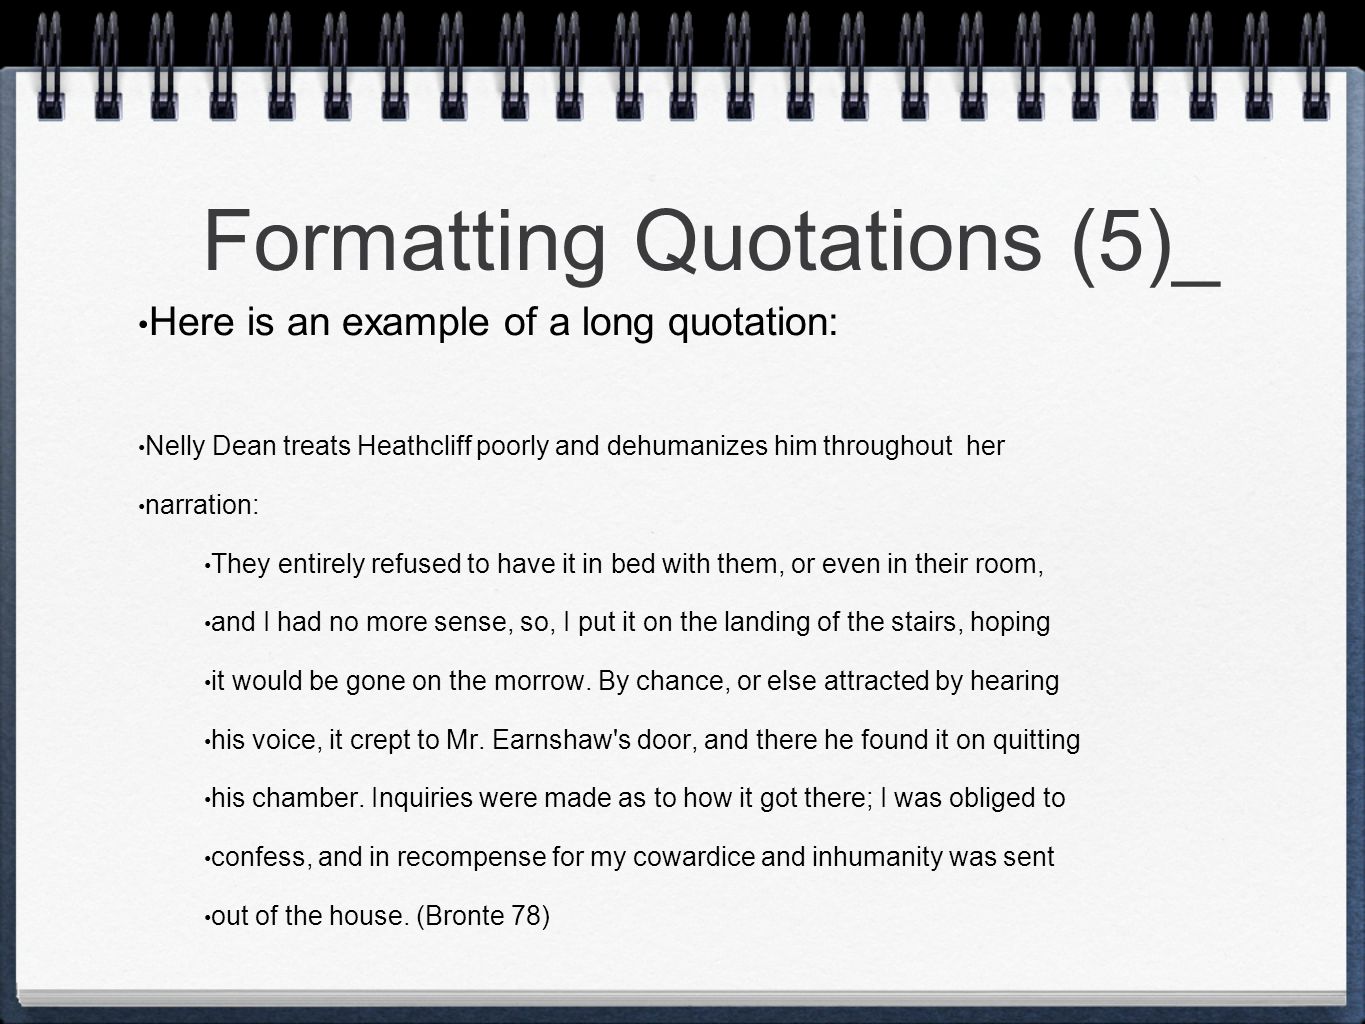 Formatting Quotations (5)_ Here is an example of a long quotation: Nelly Dean treats Heathcliff poorly and dehumanizes him throughout her narration: They entirely refused to have it in bed with them, or even in their room, and I had no more sense, so, I put it on the landing of the stairs, hoping it would be gone on the morrow.